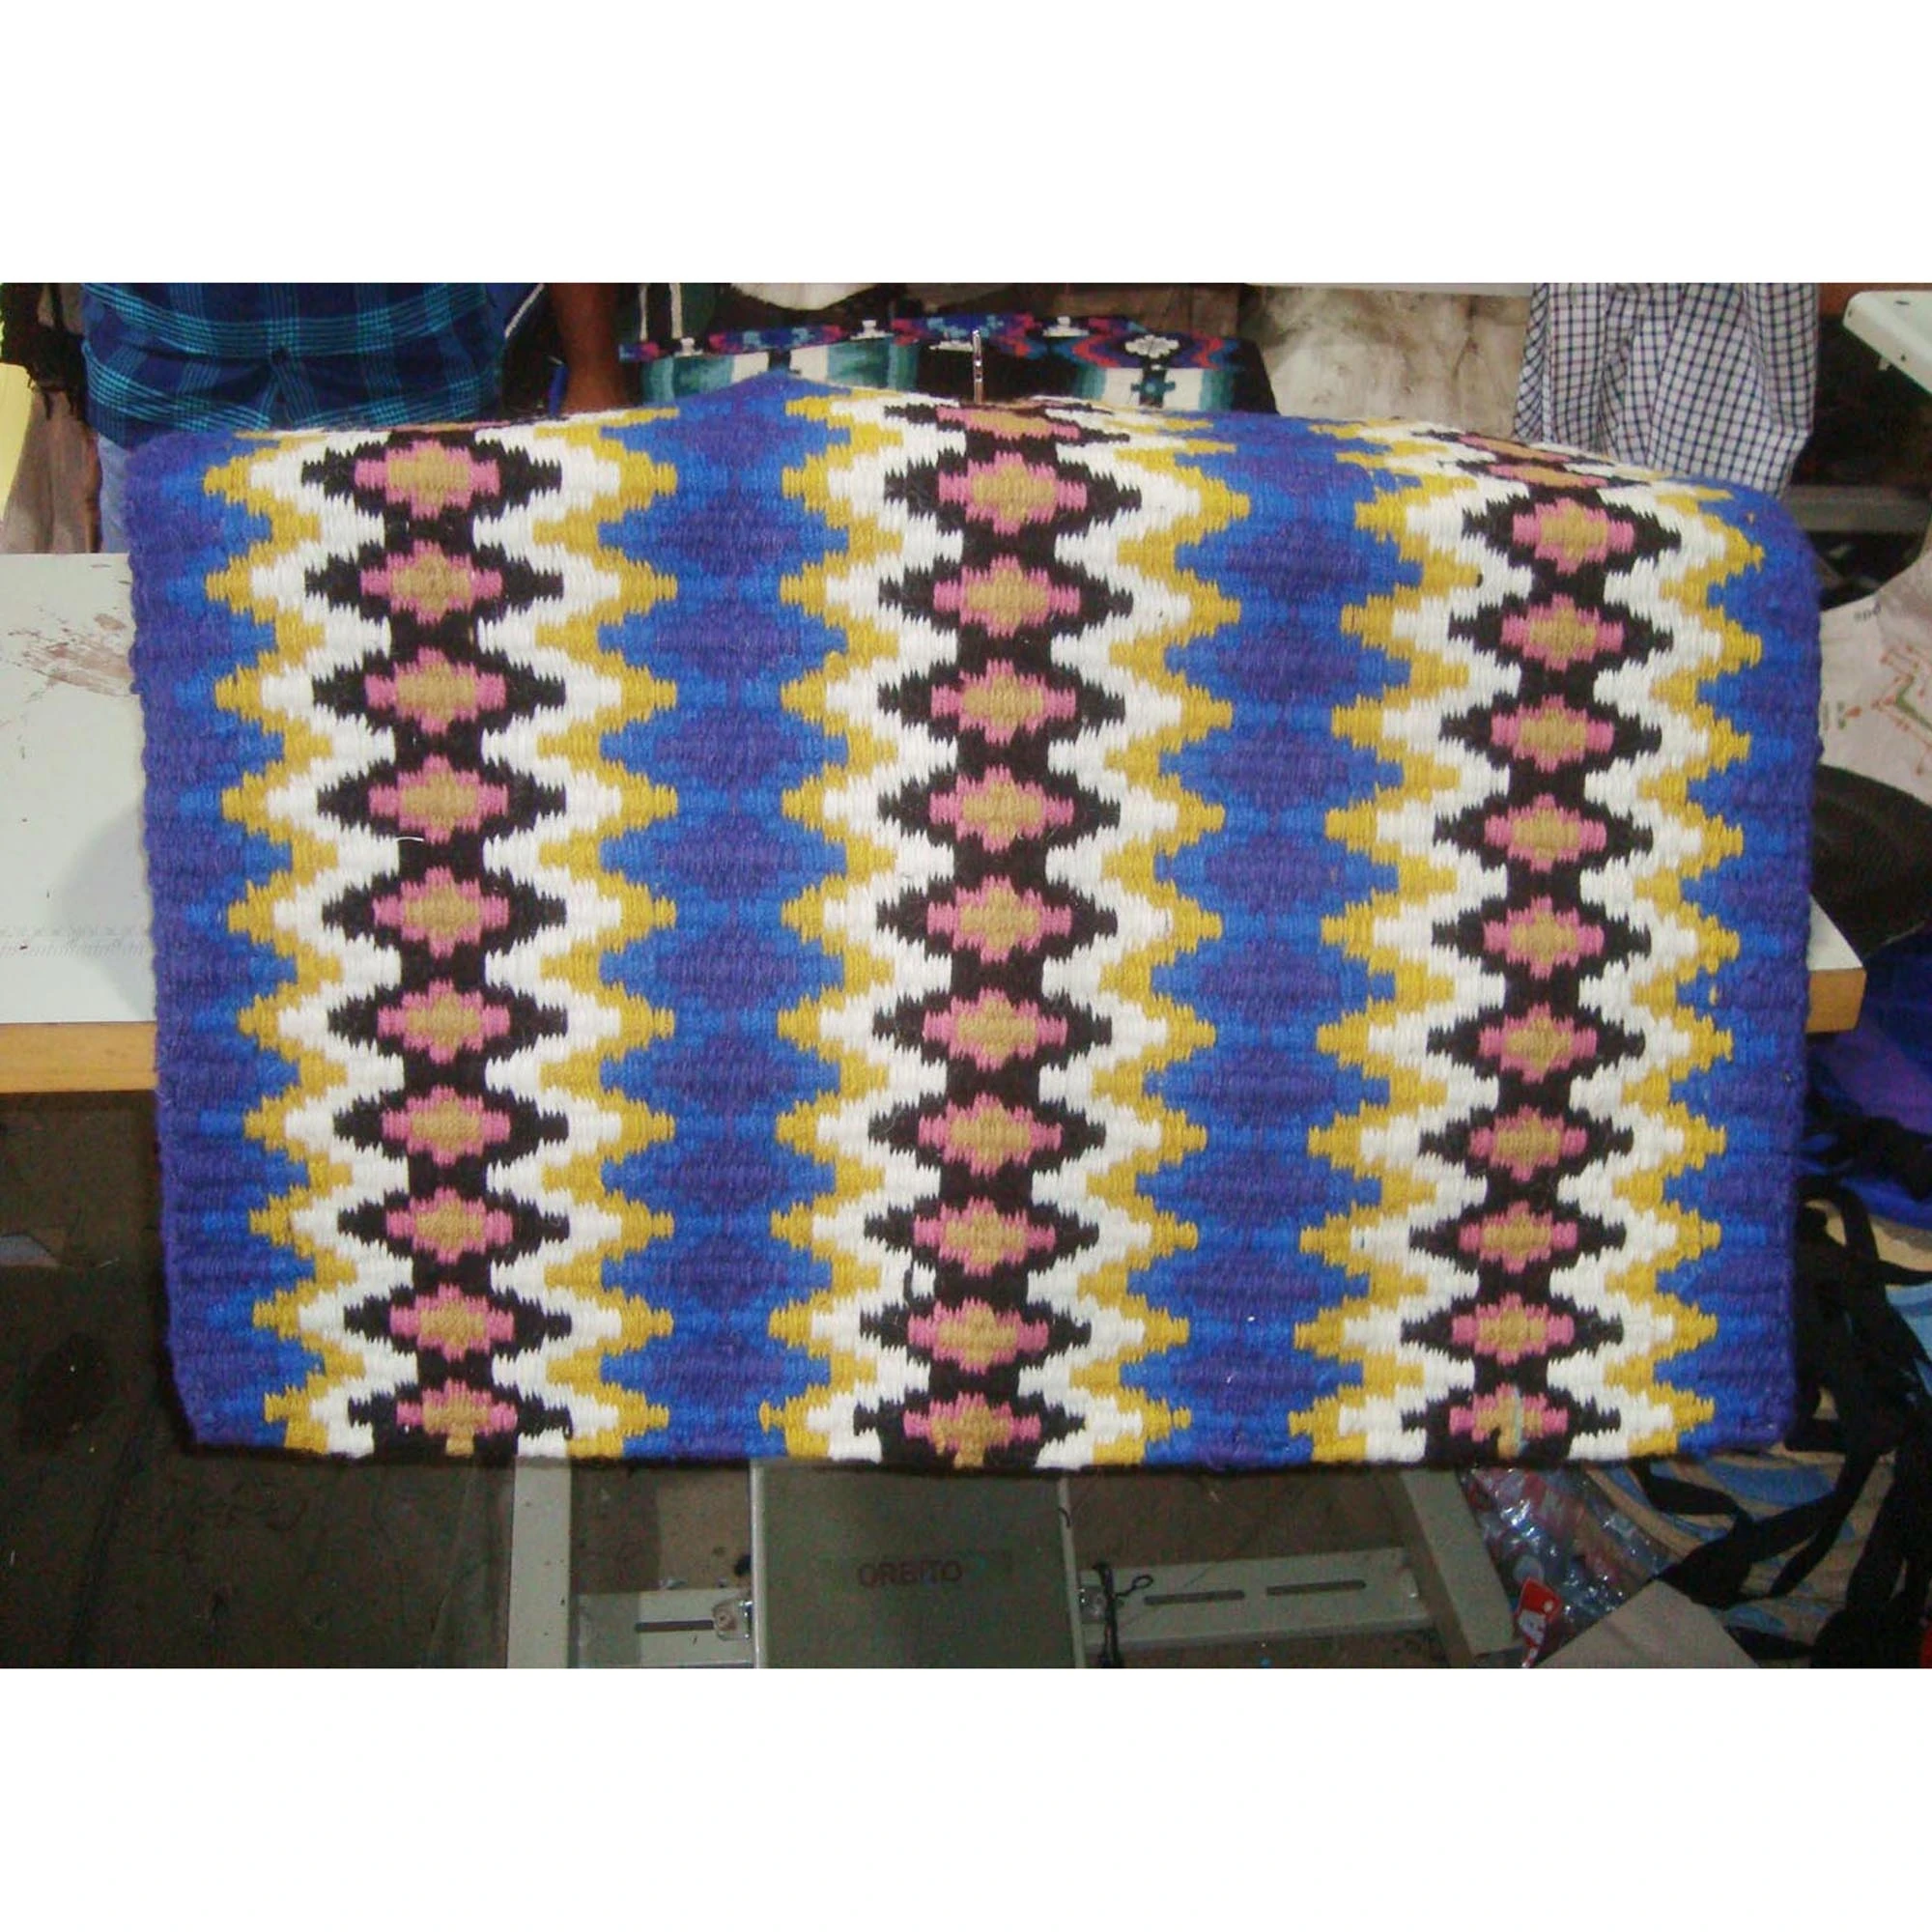 Double Weave Horse Saddle Blanket - 100% Pure  New Zealand Wool - Trendy designs and unique colors